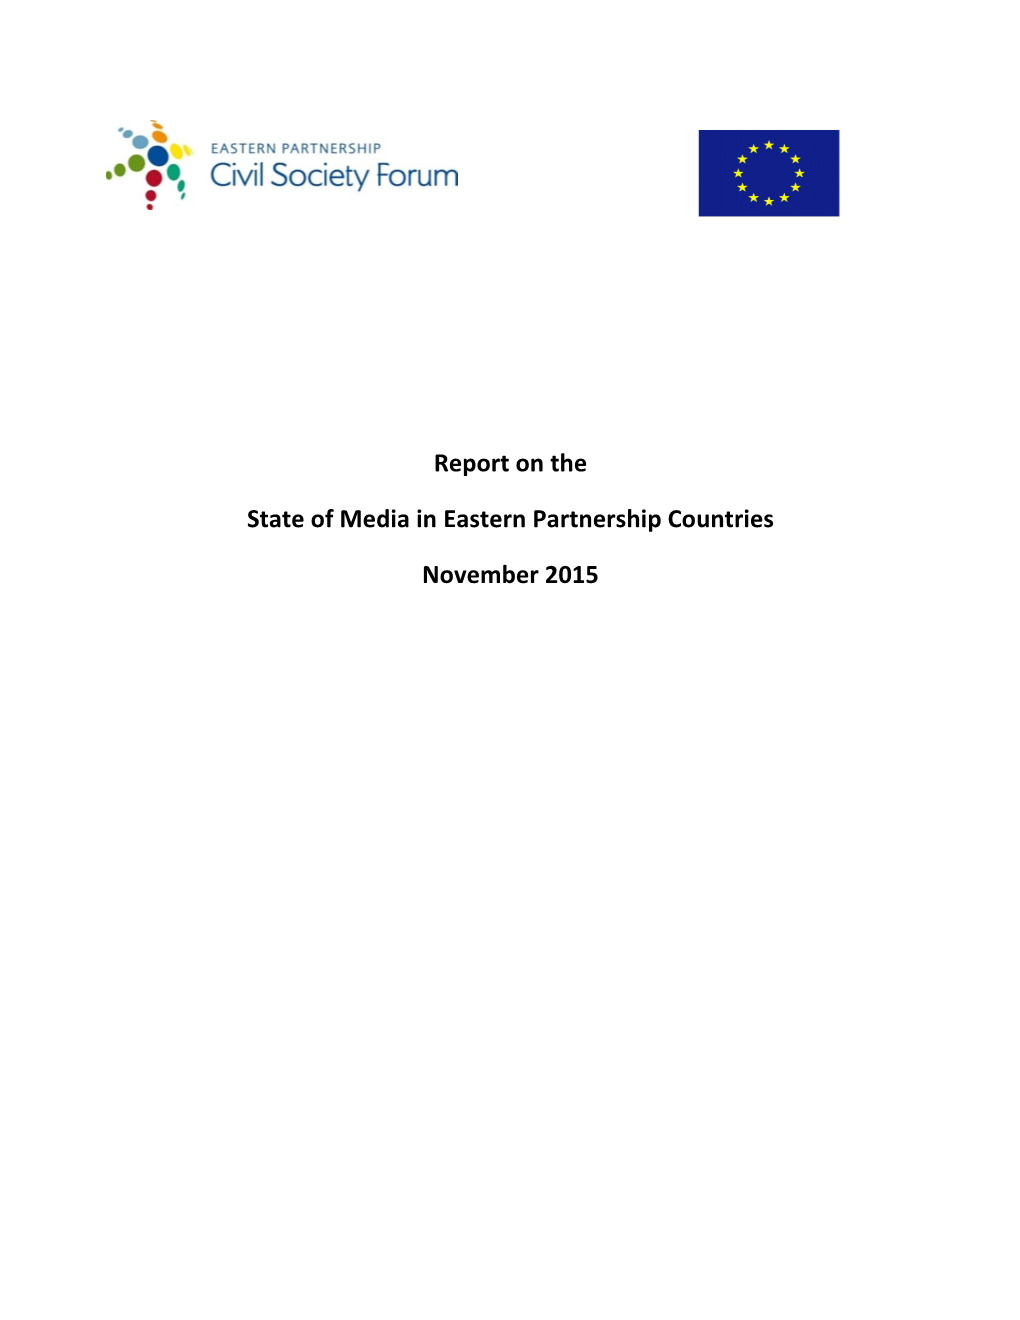 Report on the State of Media in Eastern Partnership Countries